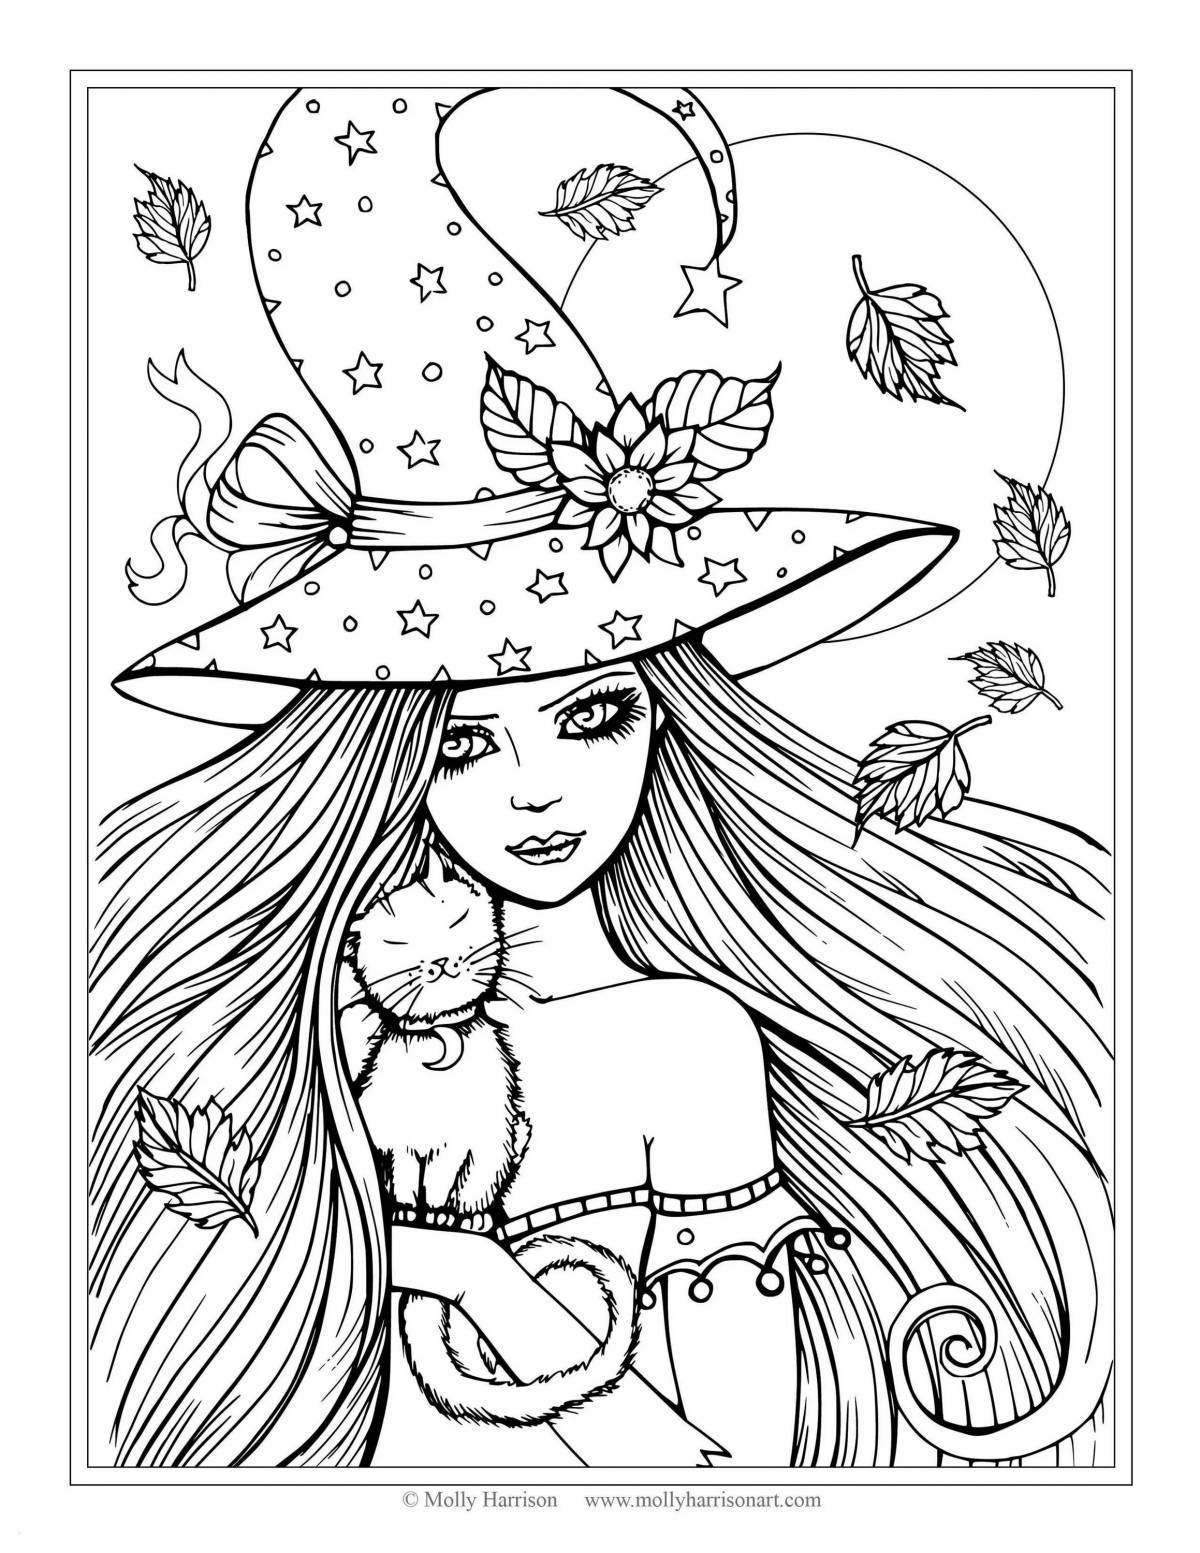 Crazy coloring book for girls 10-15 years old